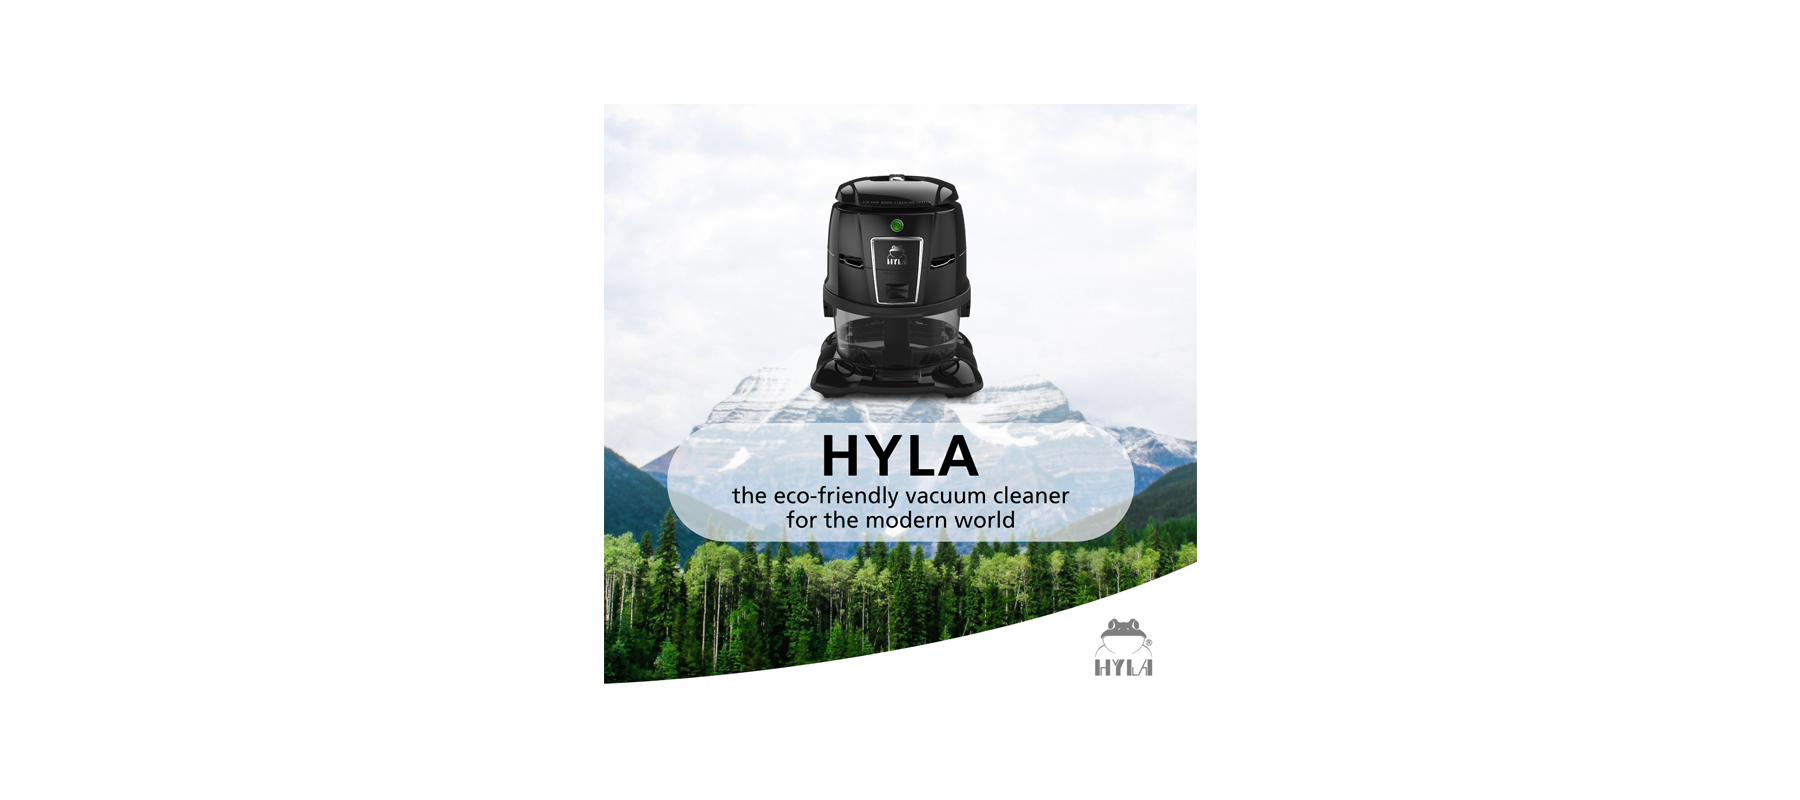 HYLA - the eco-friendly water separator cleaning system